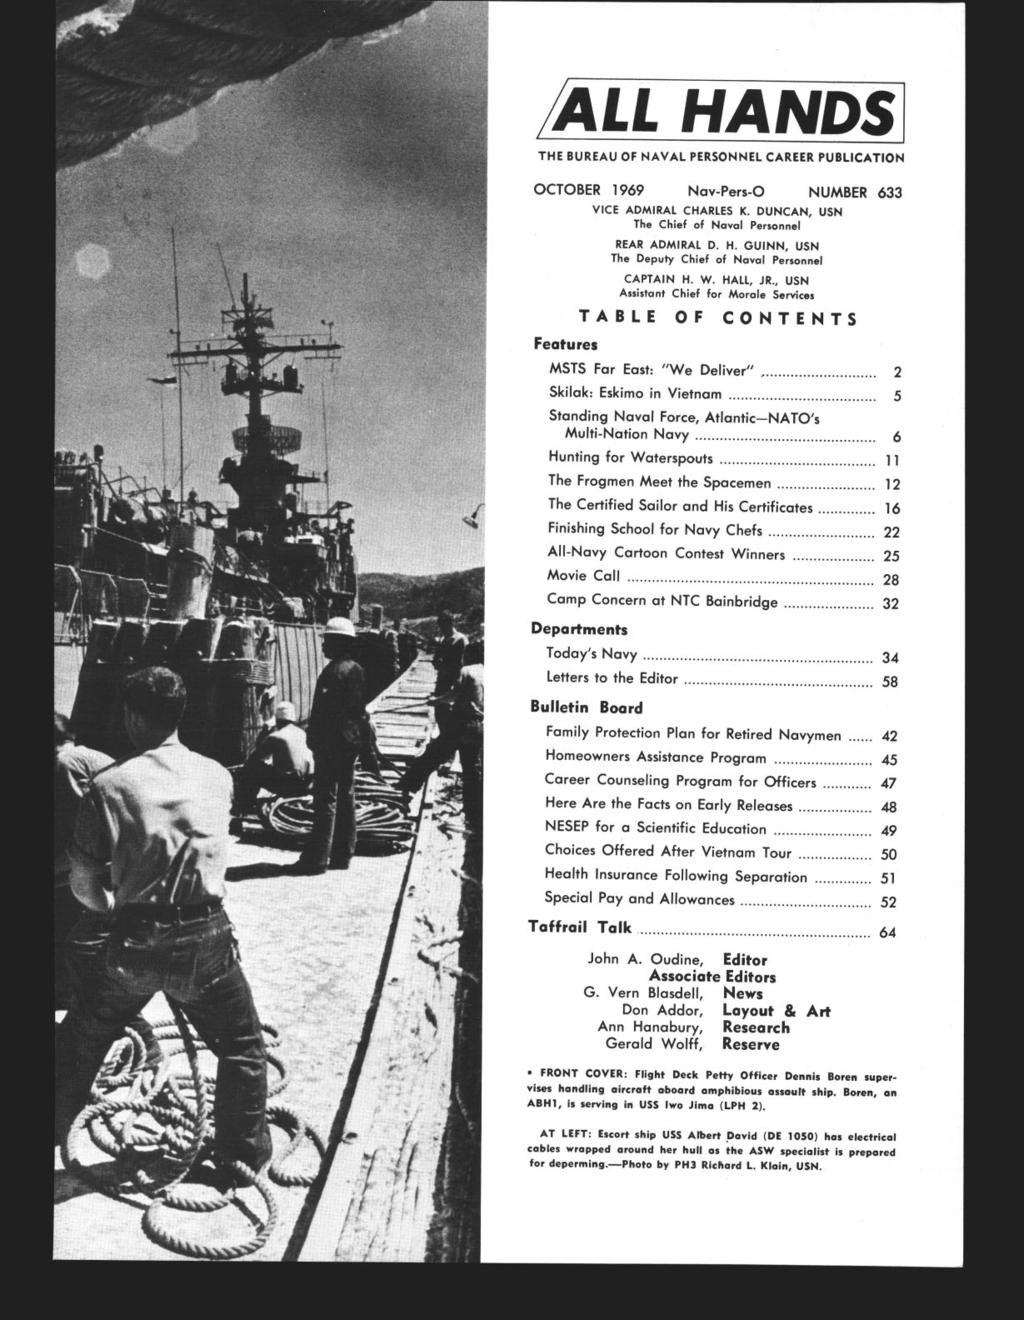 THE BUREAU OF NAVAL PERSONNEL CAREER PUBLICATION OCTOBER 1969 Nav-Pers-0 NUMBER 633 Features VICE ADMIRAL CHARLES K. DUNCAN, USN The Chief of Naval Personnel REAR ADMIRAL D. H.